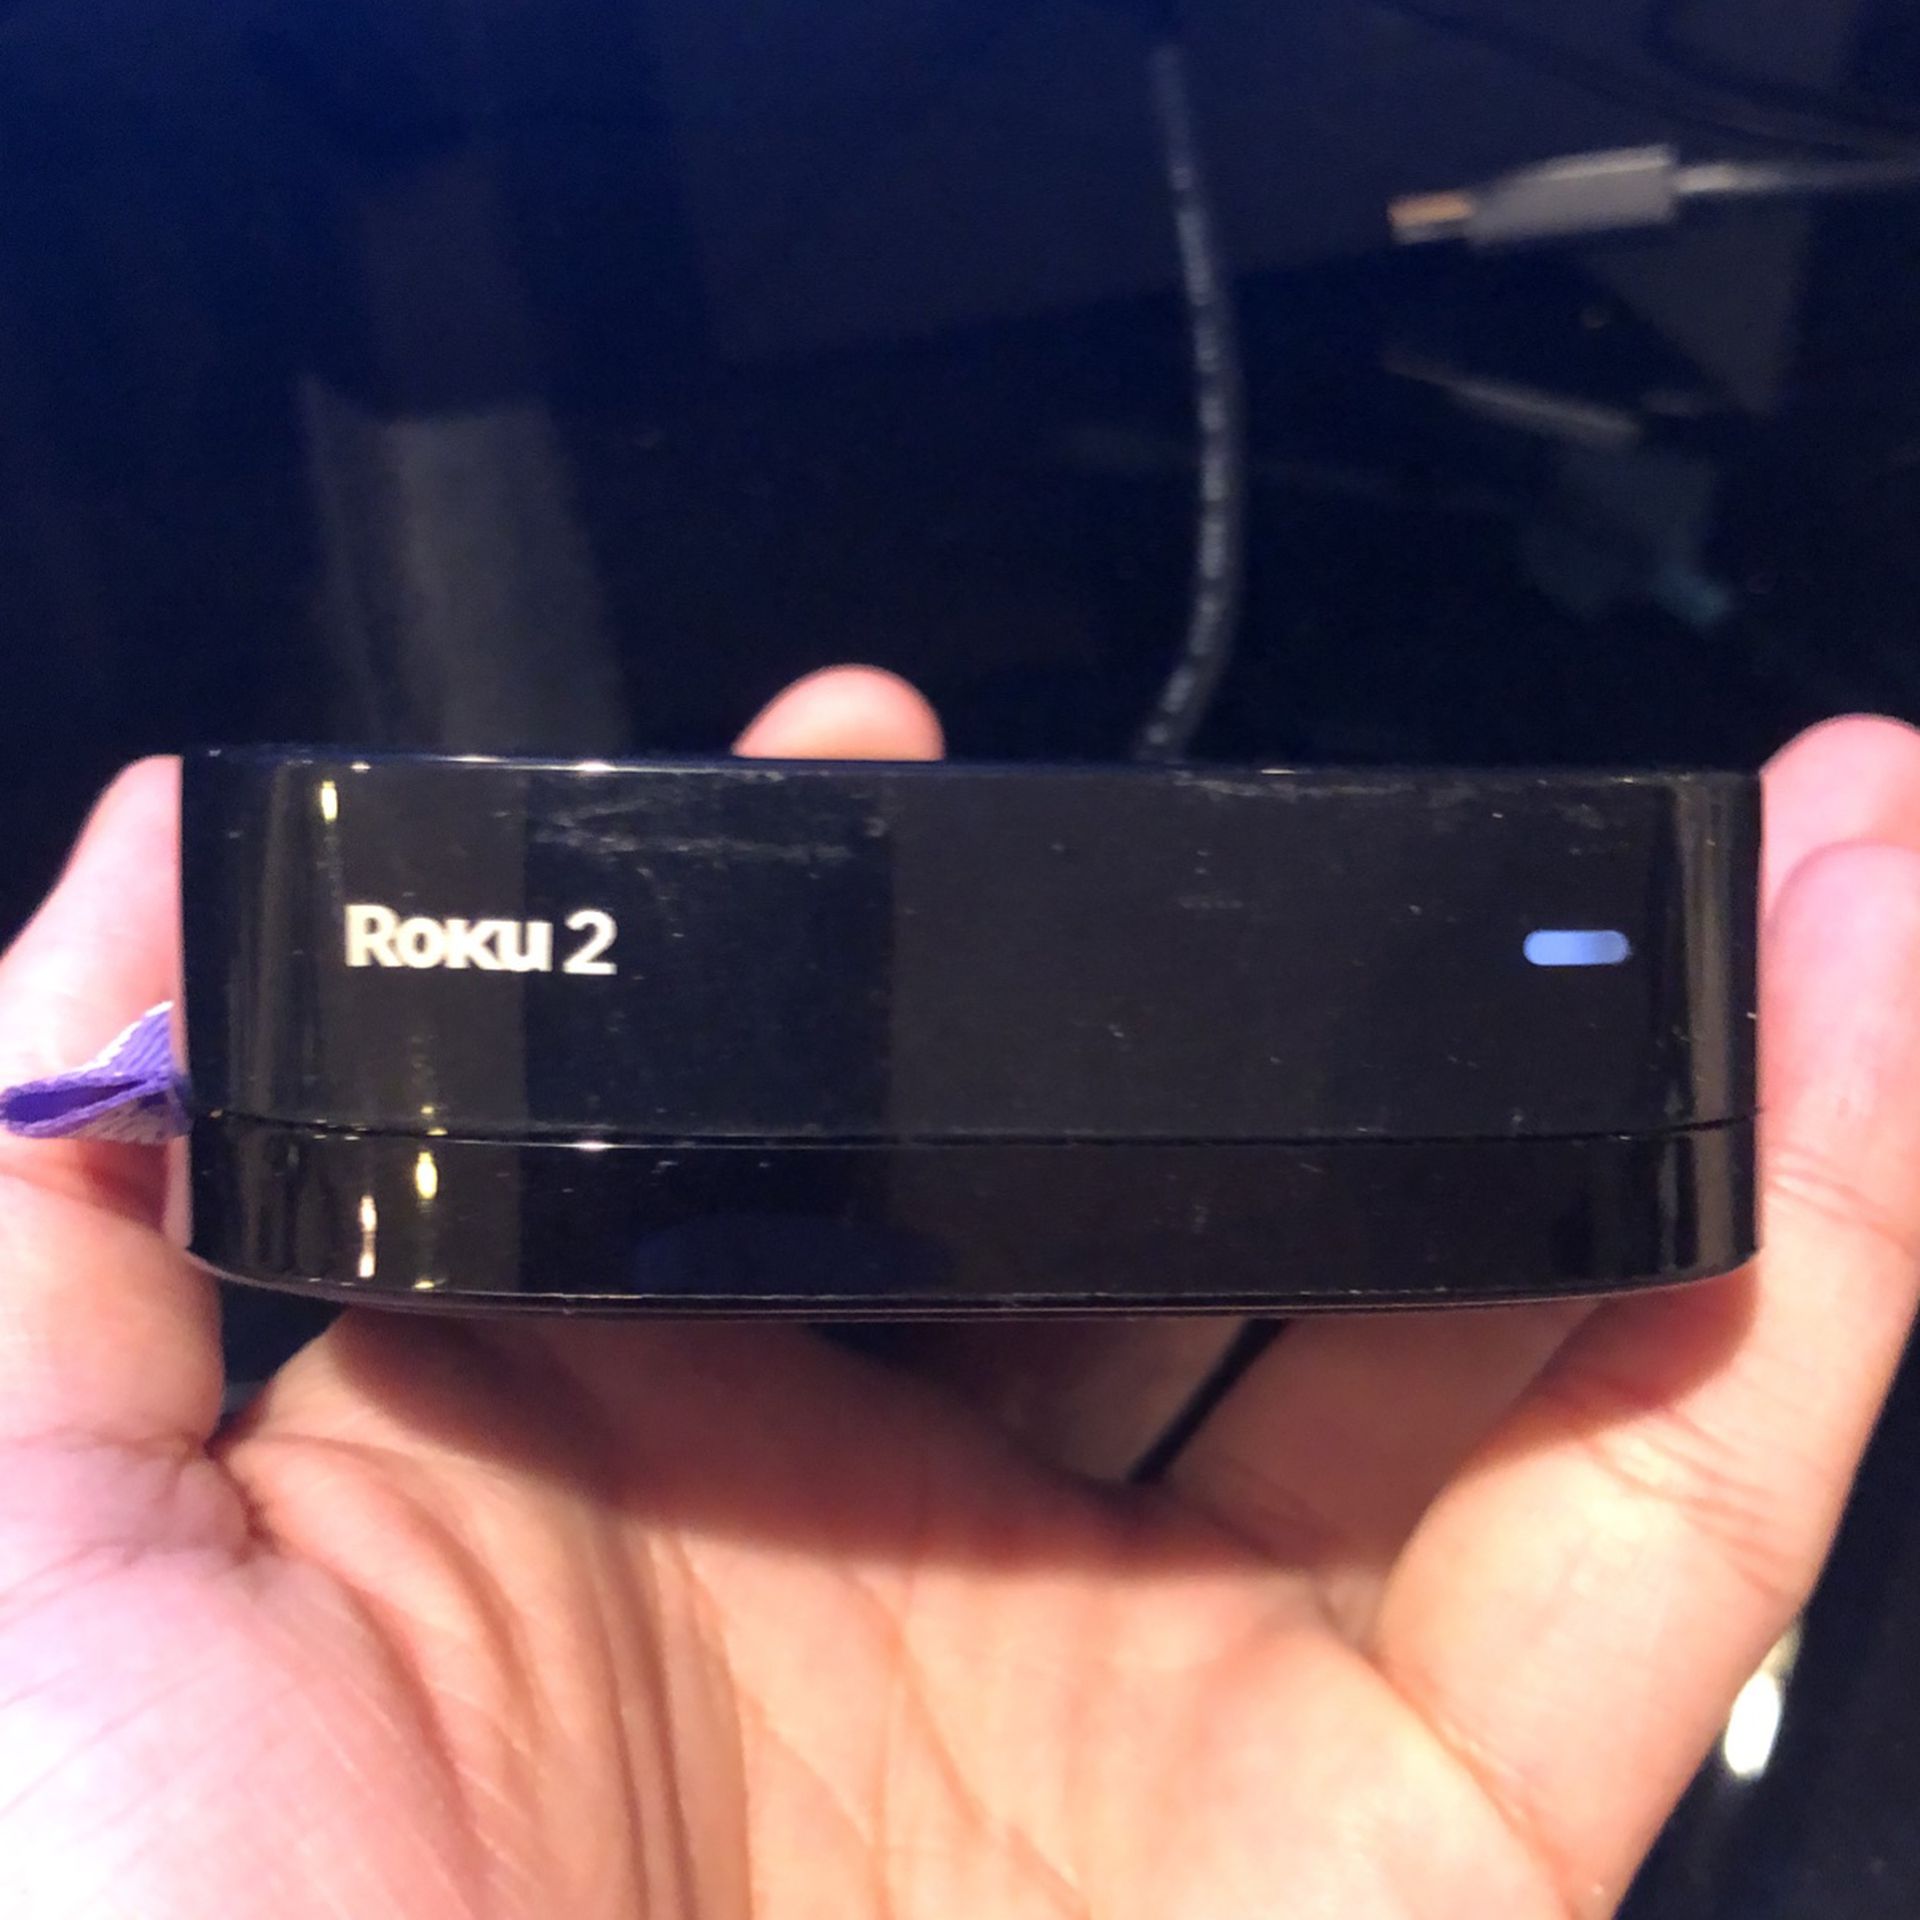 Working Roku 2 Device Only